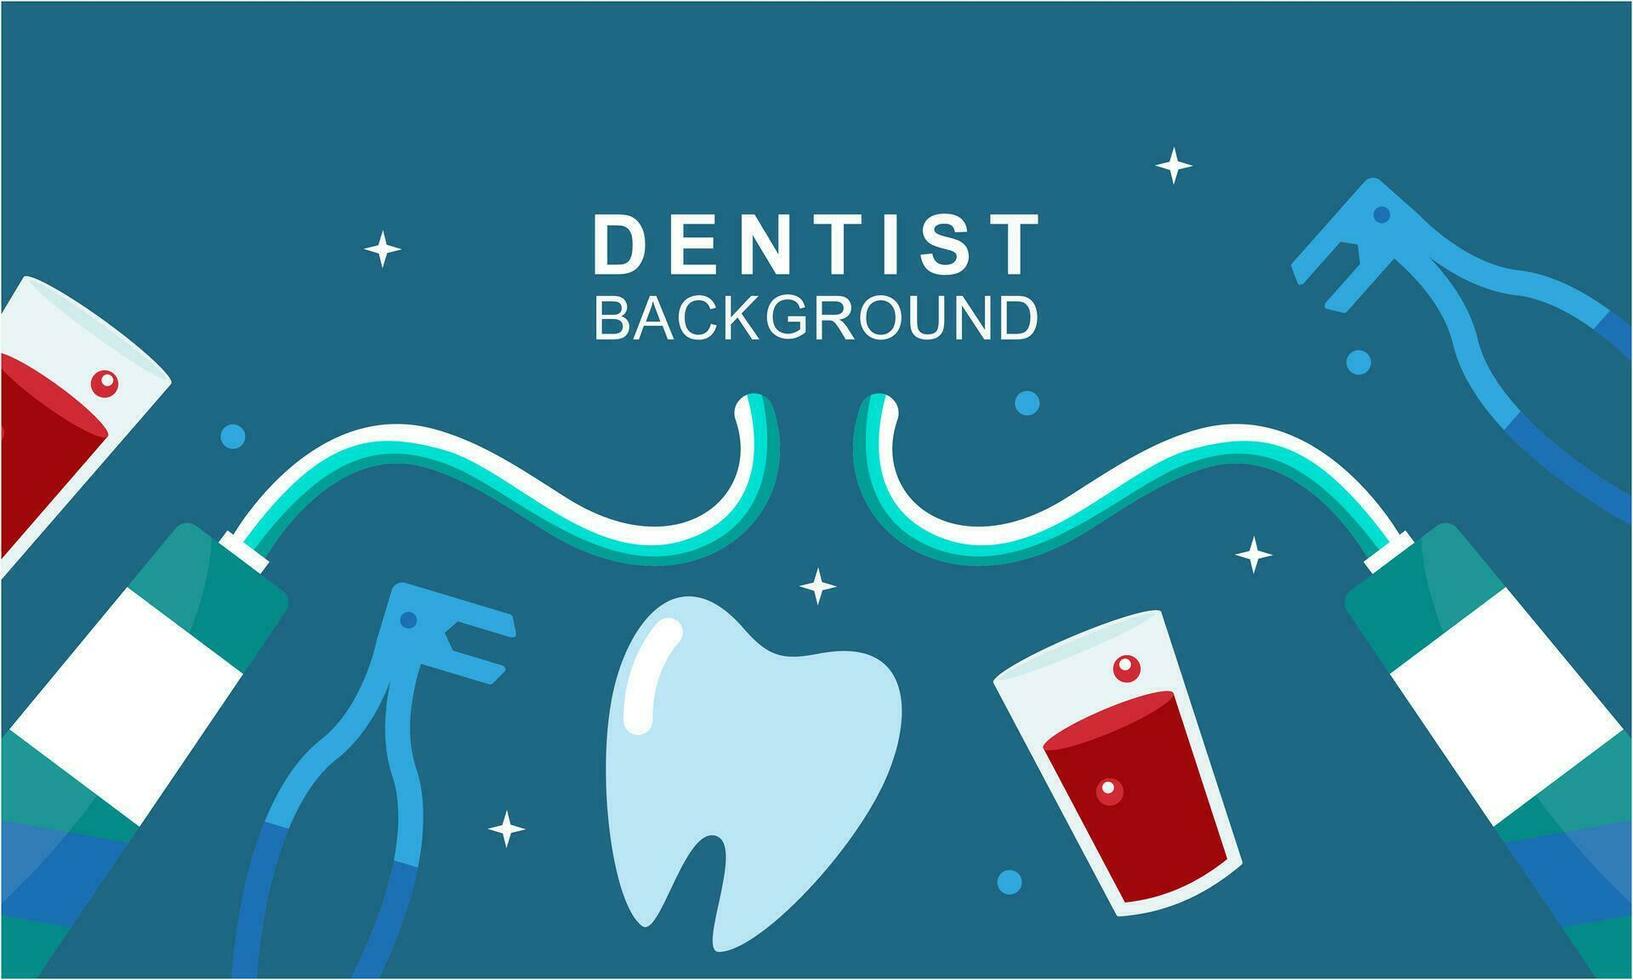 Dentist tools and equipment banner concept vector